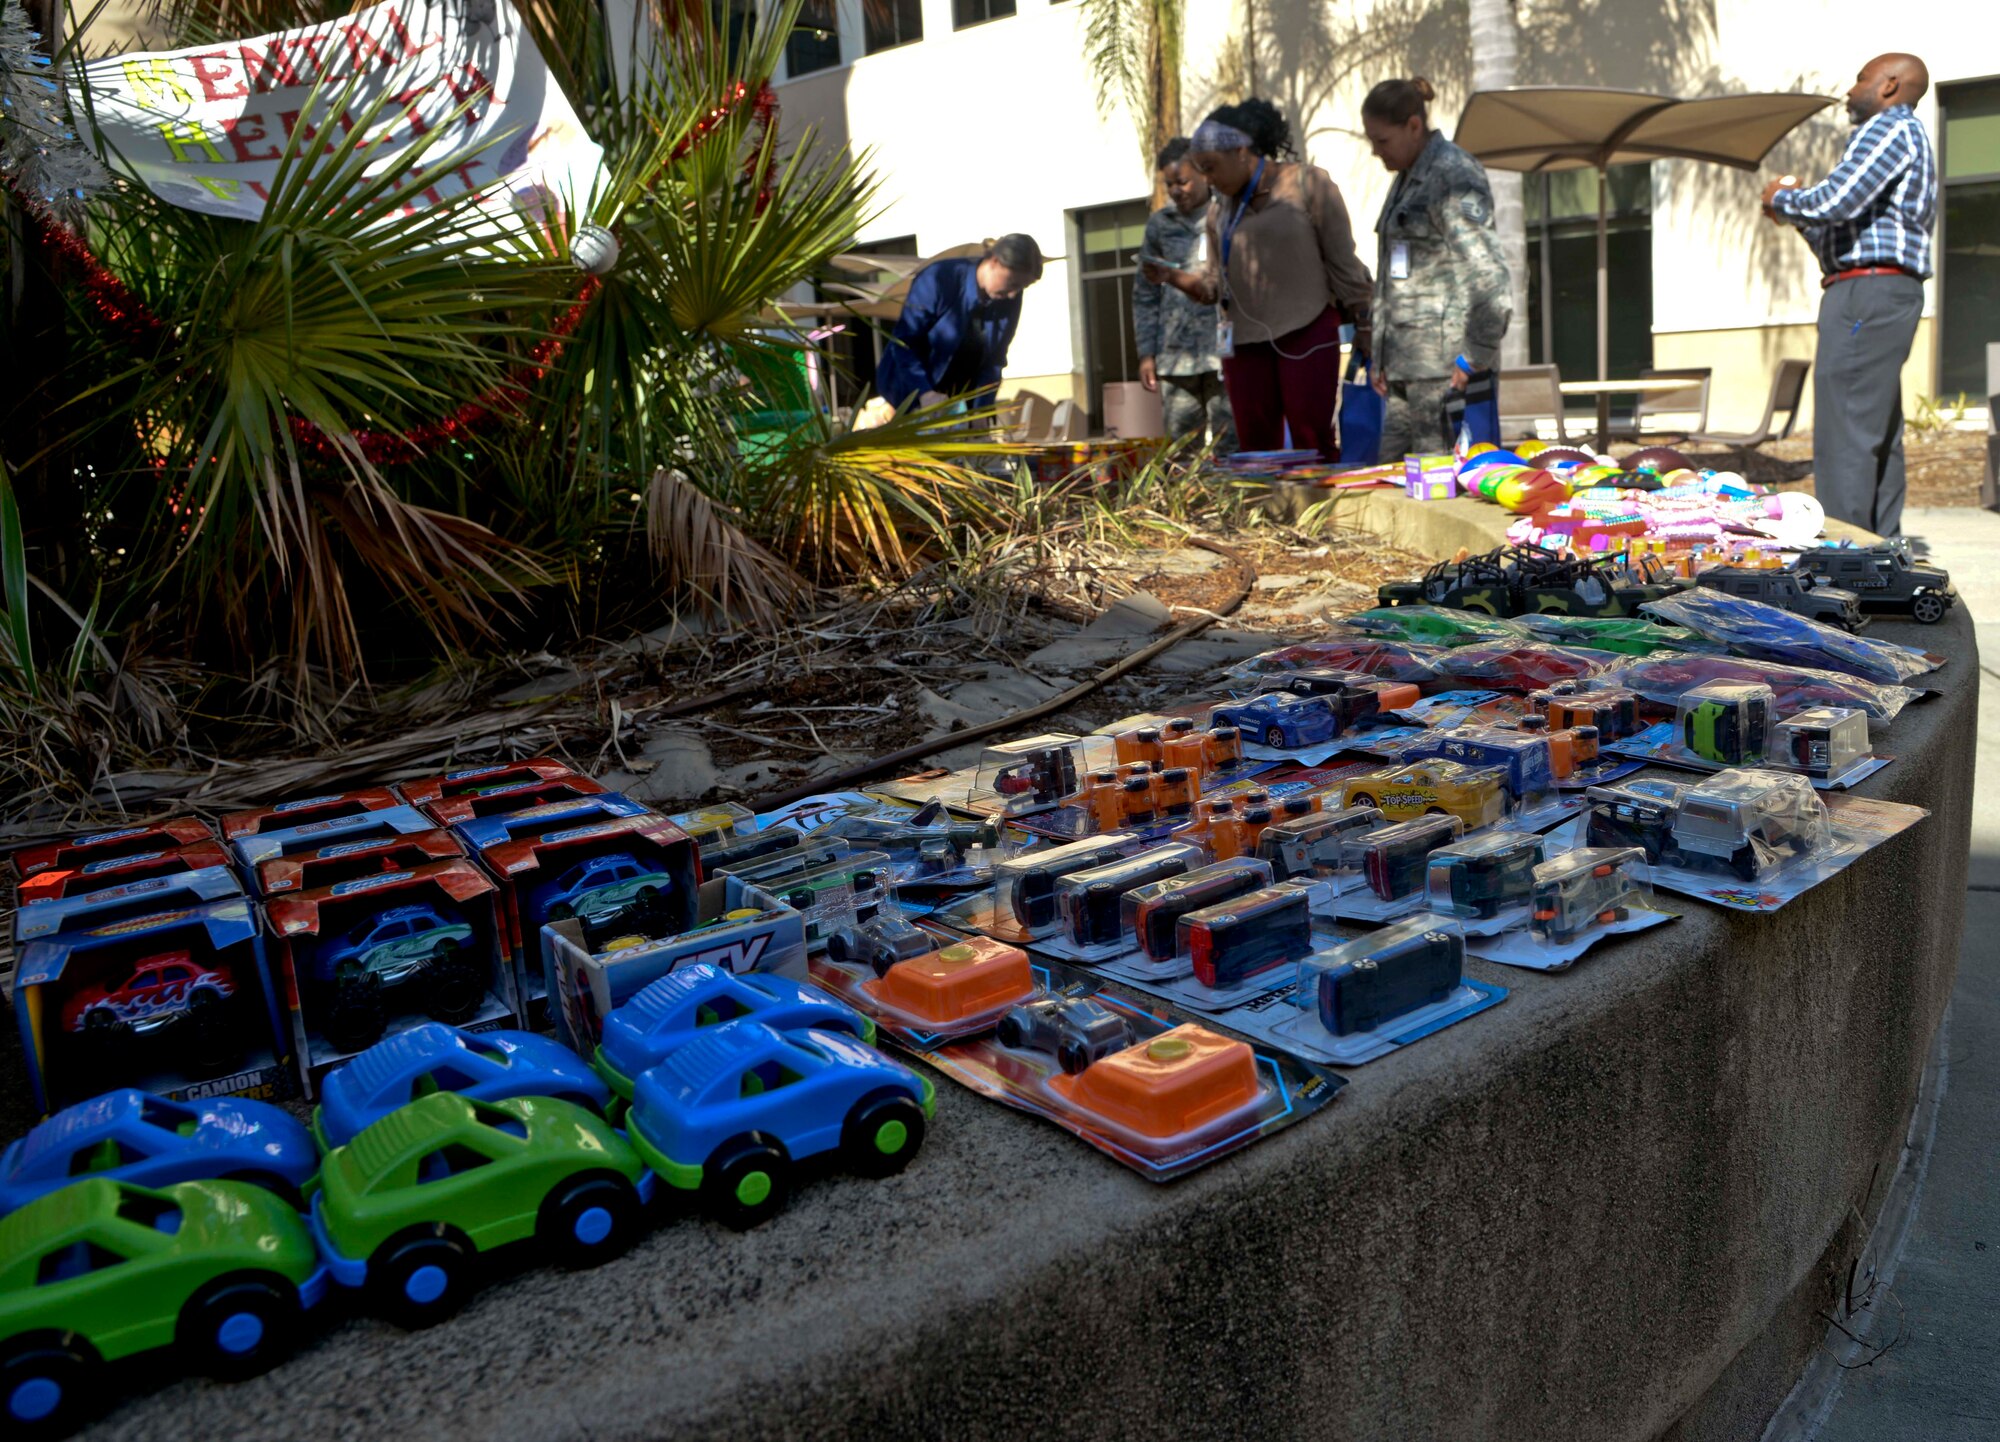 Toys lay on display during the 6th Medical Group (MDG) appreciation event at MacDill Air Force Base, Fla., Dec. 14, 2016. Free toys, crayons, reading and coloring books were offered to 6th MDG personnel to give to children as gifts for the holidays. (U.S. Air Force photo by Senior Airman Vernon L. Fowler Jr.)